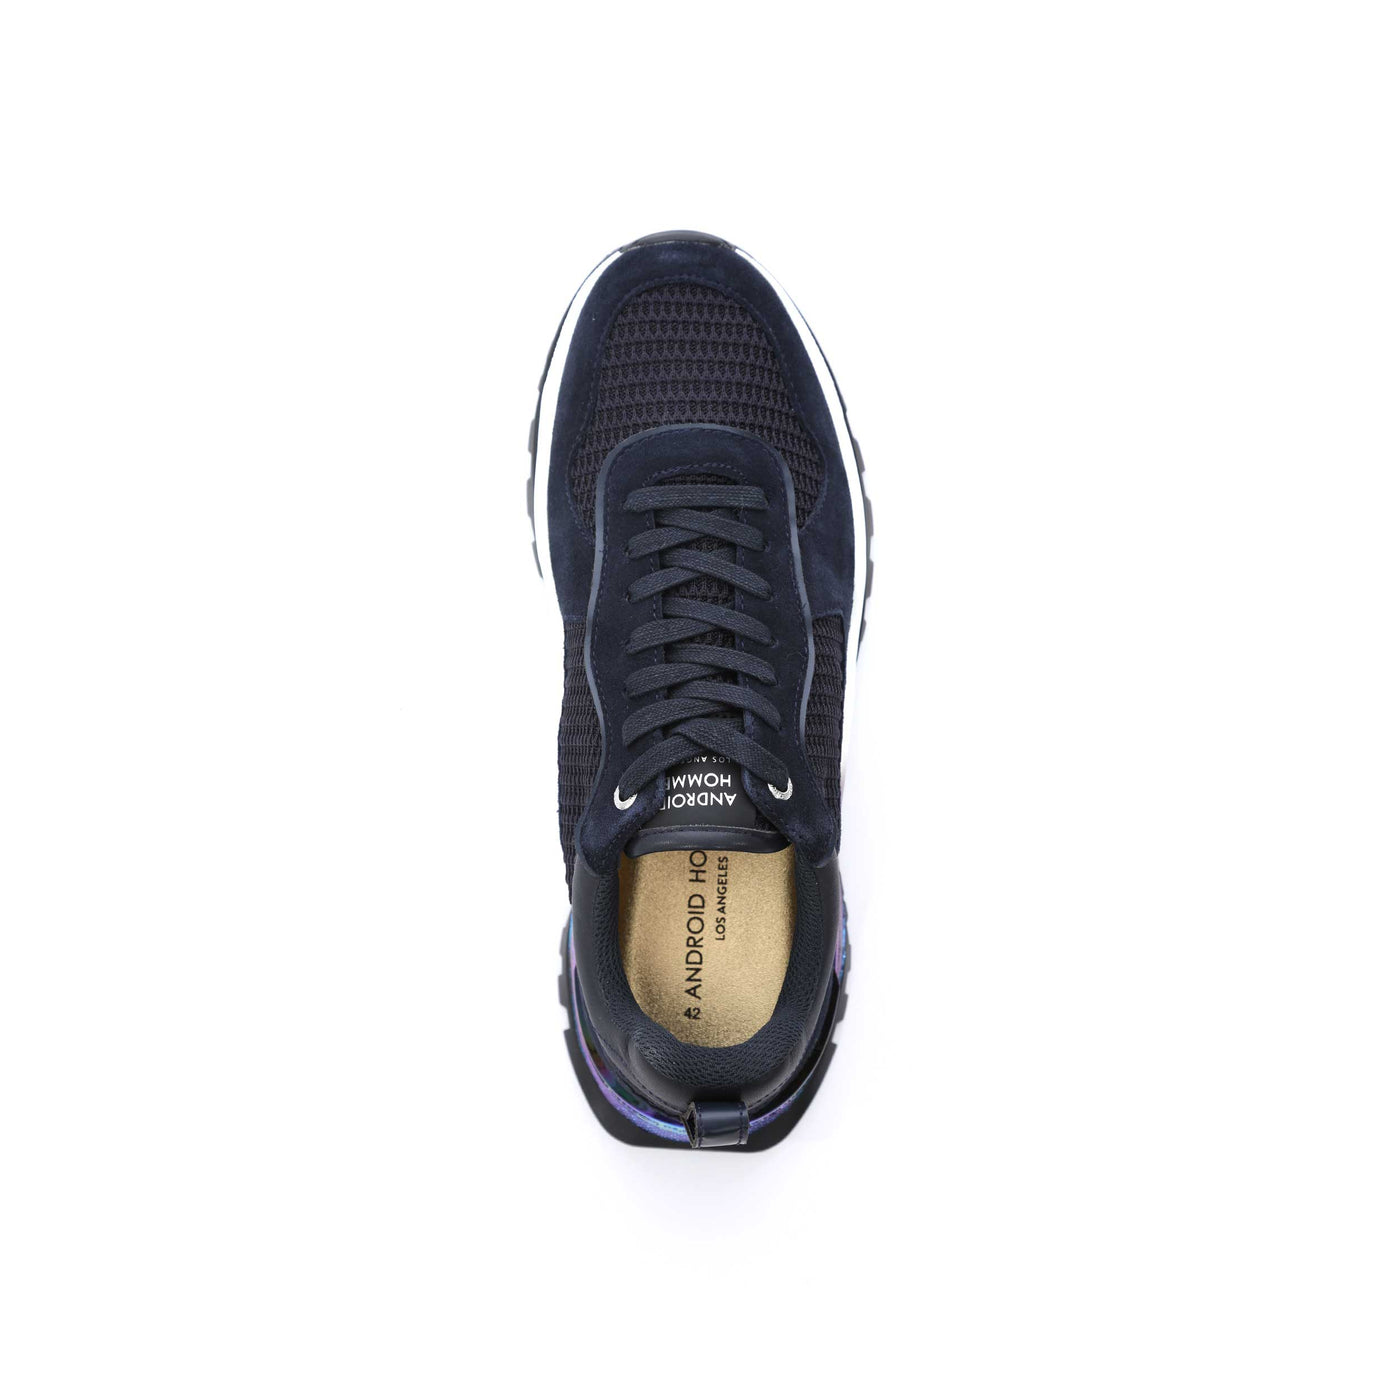 Android Homme Leo Carrillo Trainer in Navy Iridescent Birdseye